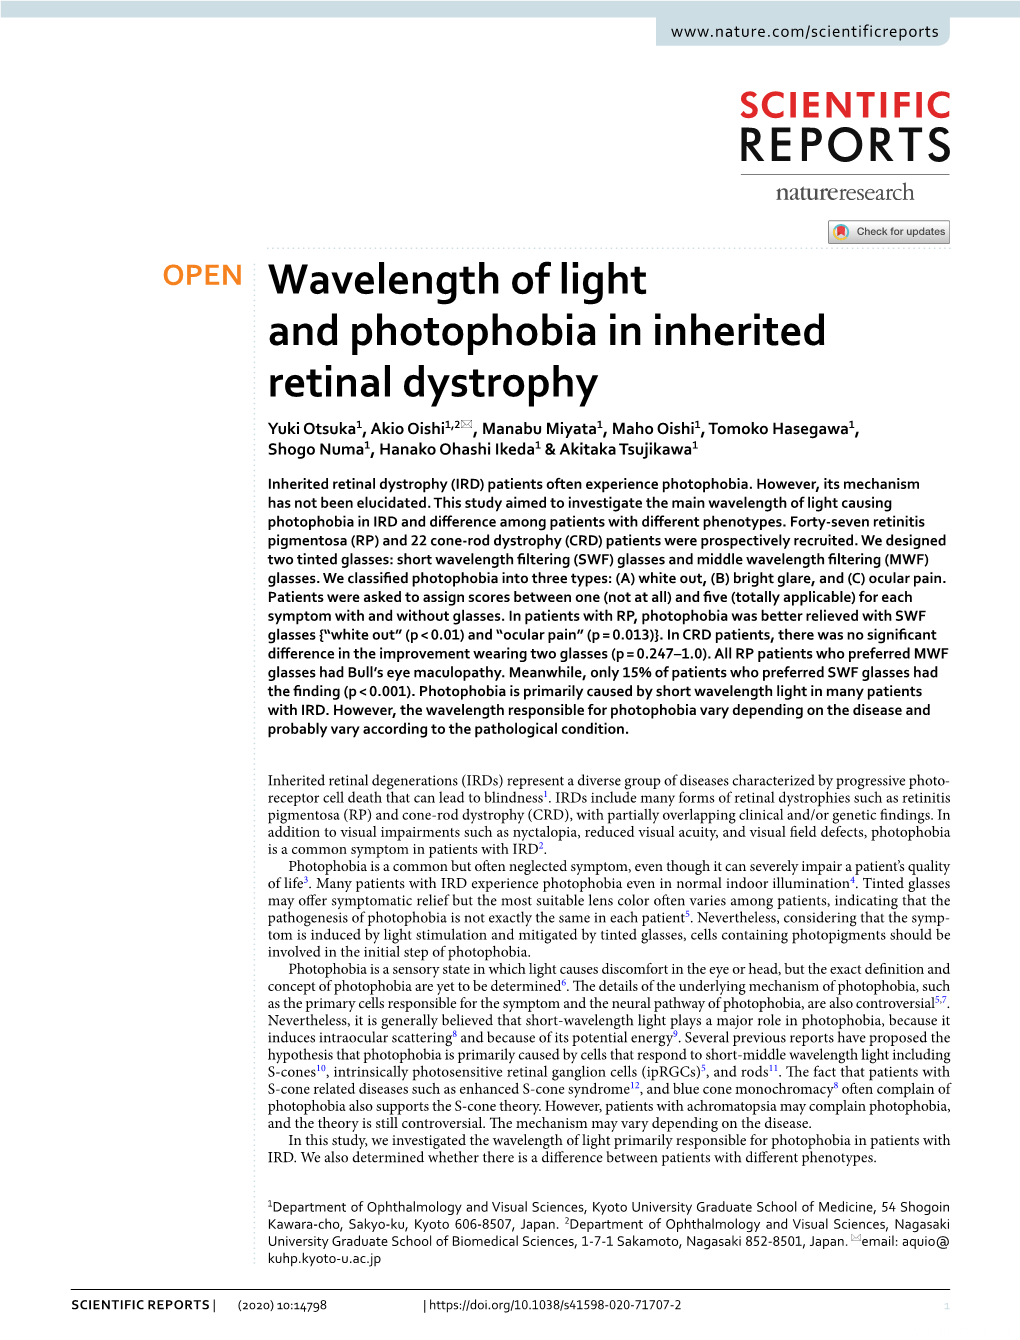 Wavelength of Light and Photophobia in Inherited Retinal Dystrophy